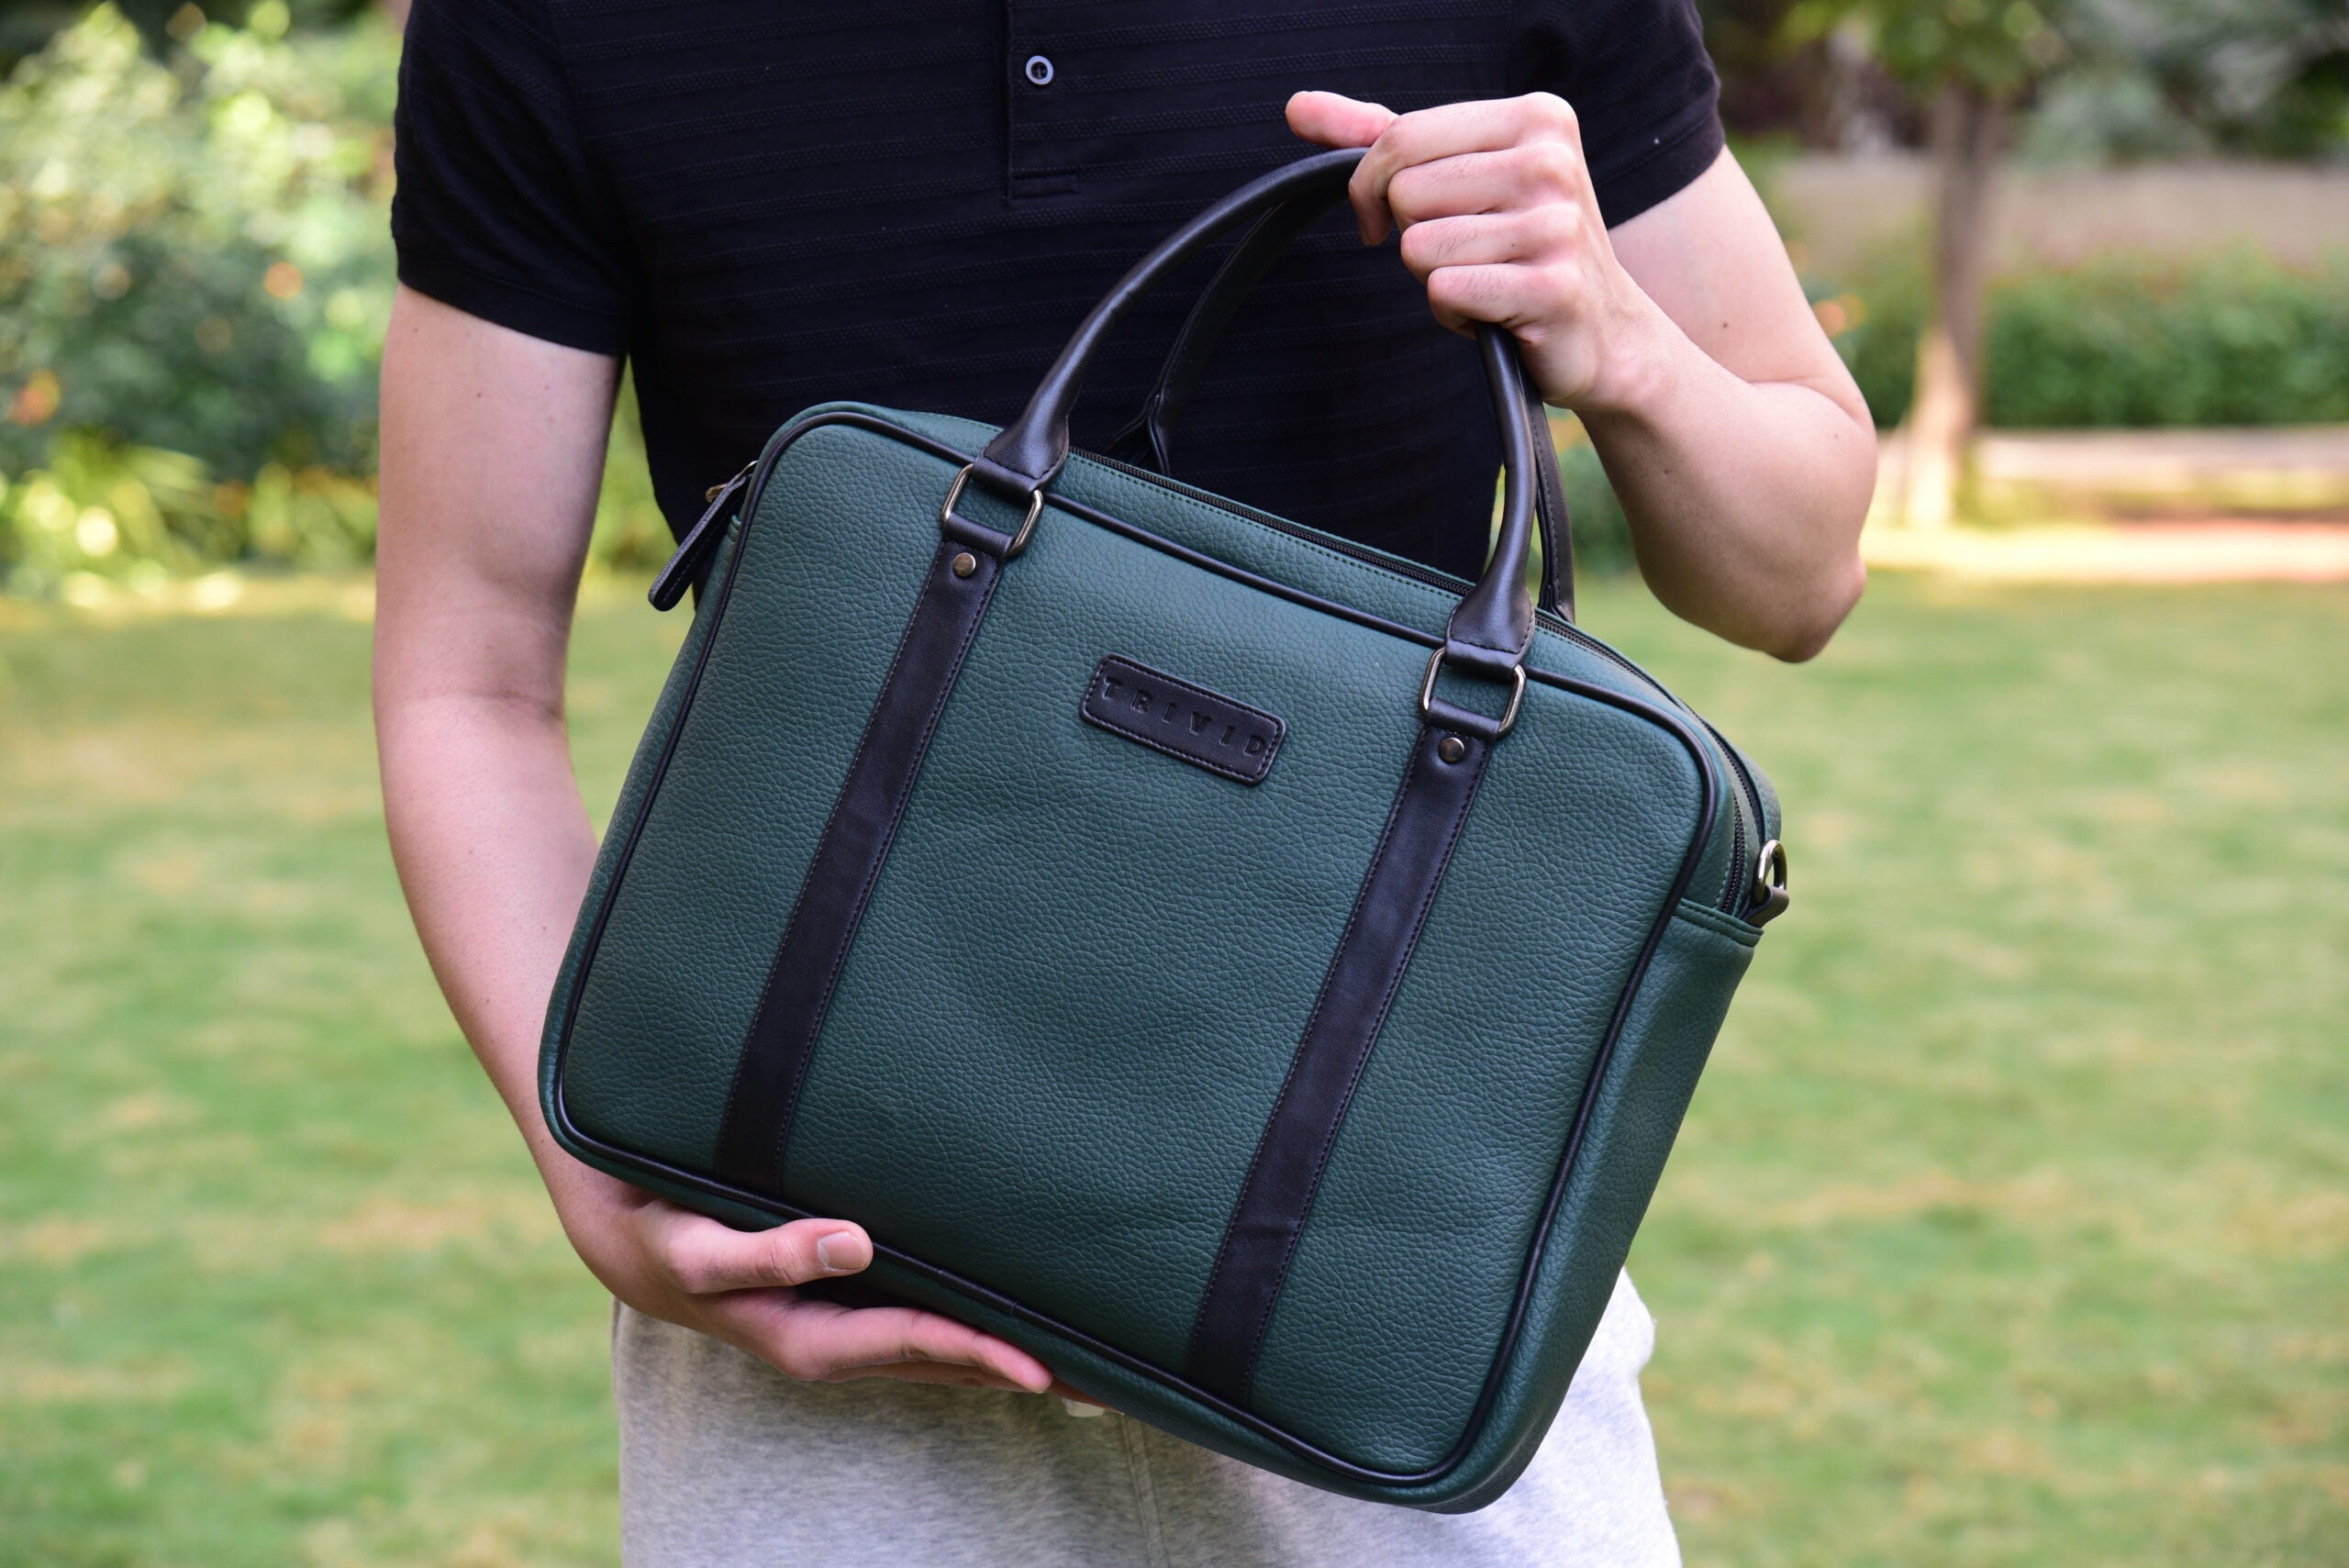 Green and Black TRIVID ESSENTIAL TWO-SECTION LAPTOP BAG